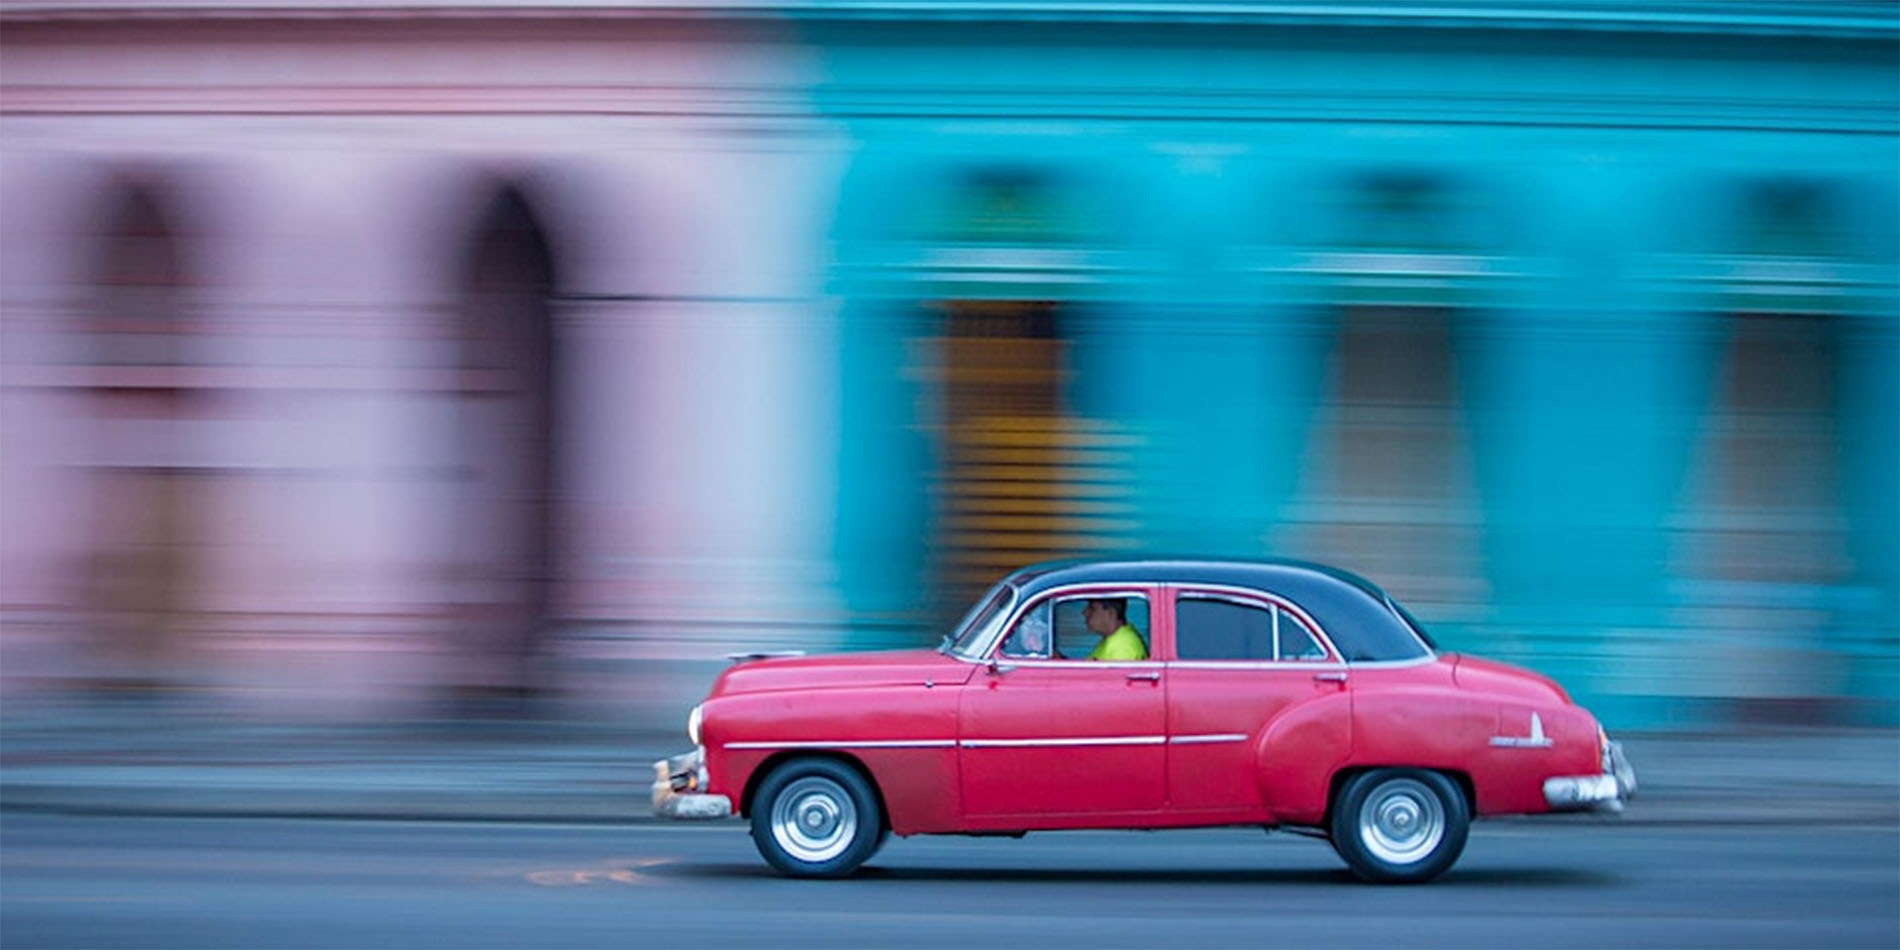 car in motion in front of colorful buildings